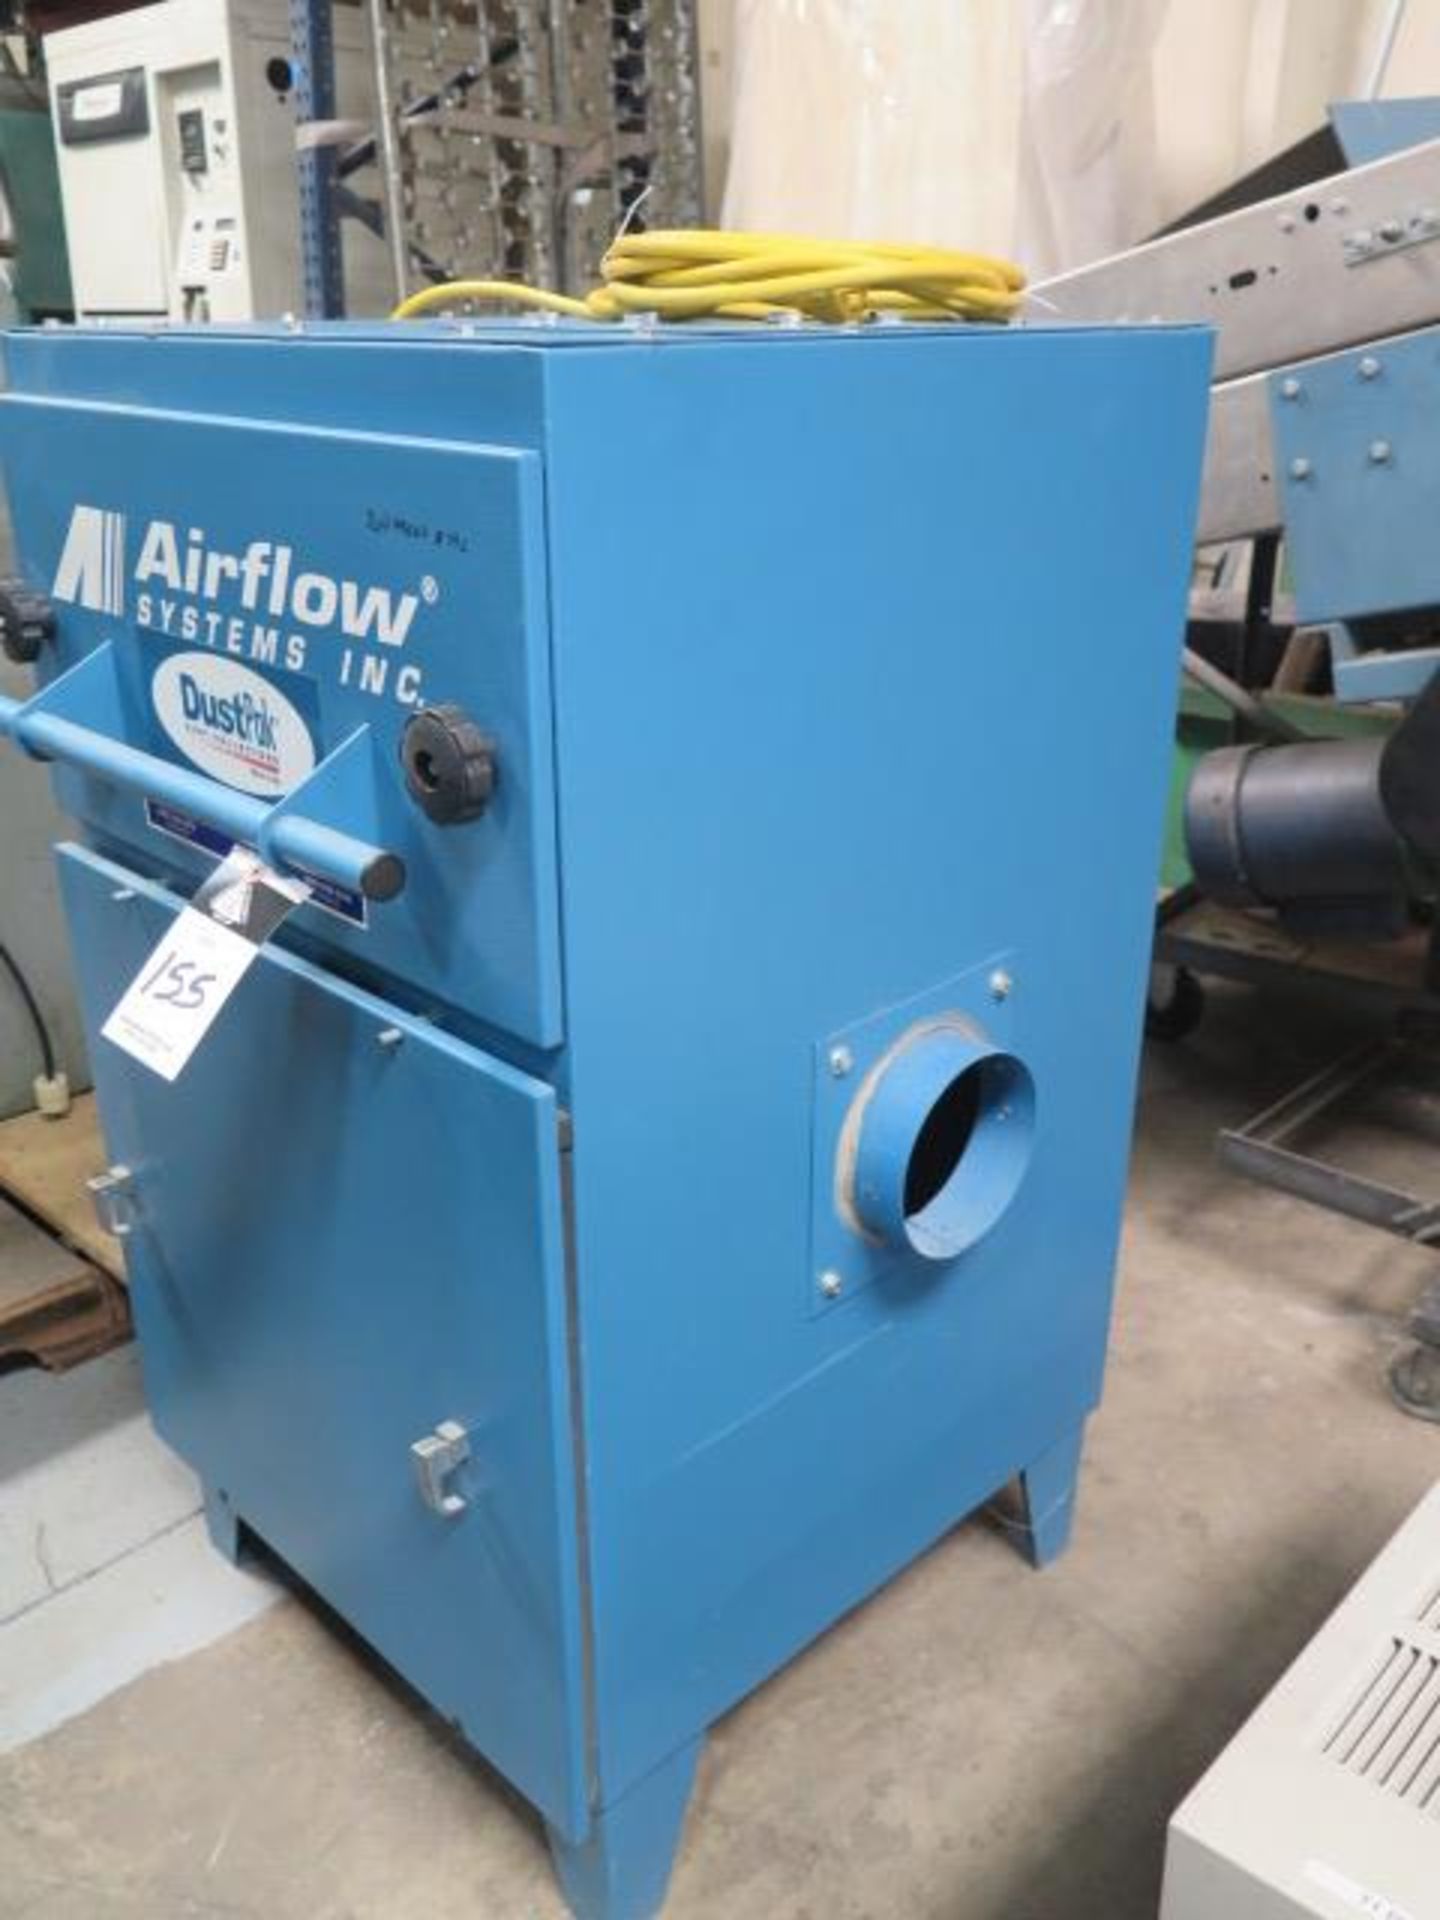 Airflow mdl. DS-1-SHAKER-PG5 "Dust PAK" Dust Collector (SOLD AS-IS - NO WARRANTY)